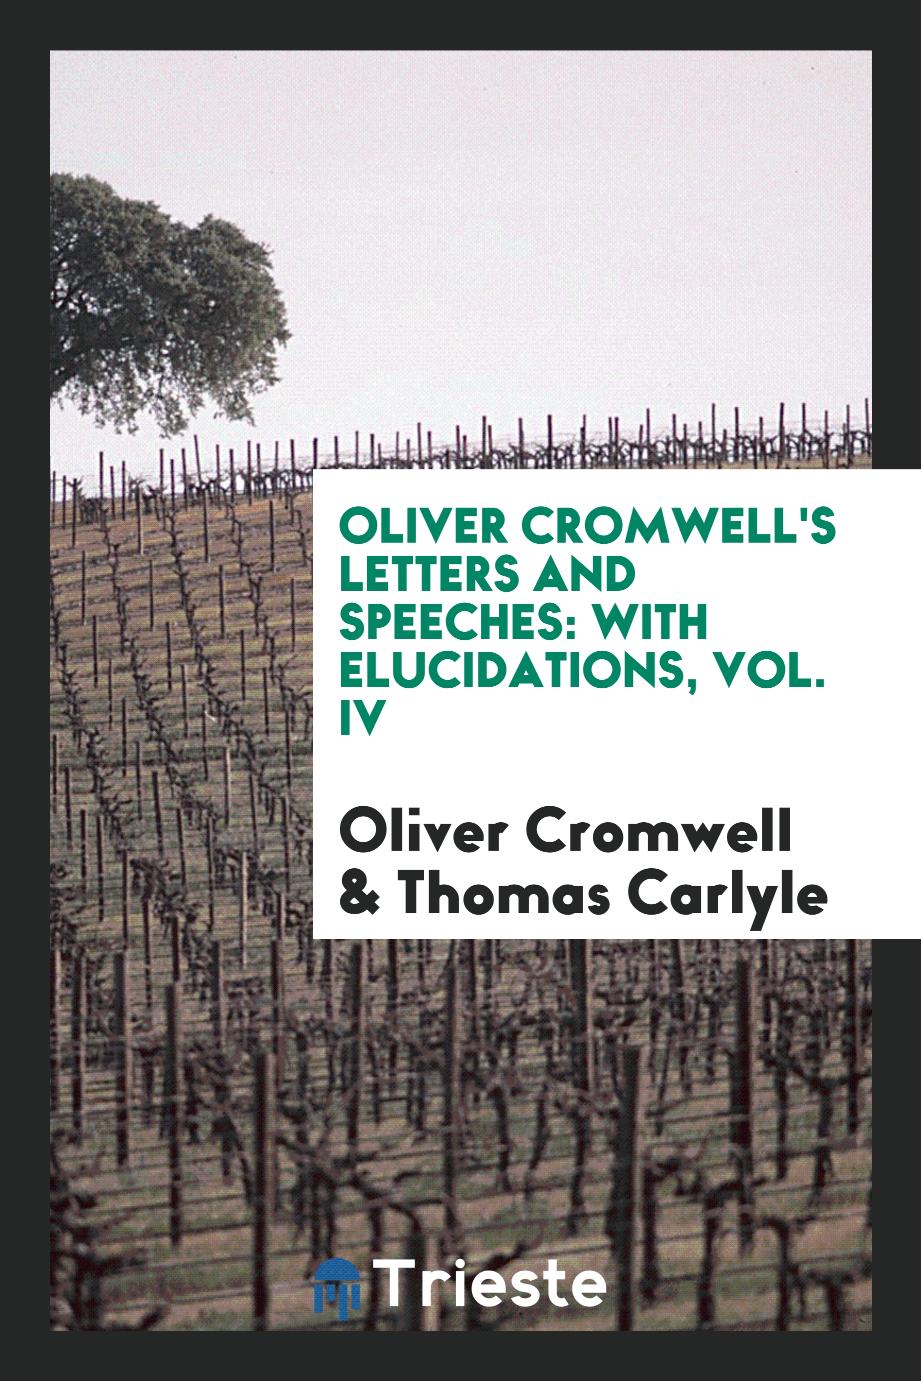 Oliver Cromwell's Letters and Speeches: With Elucidations, Vol. IV